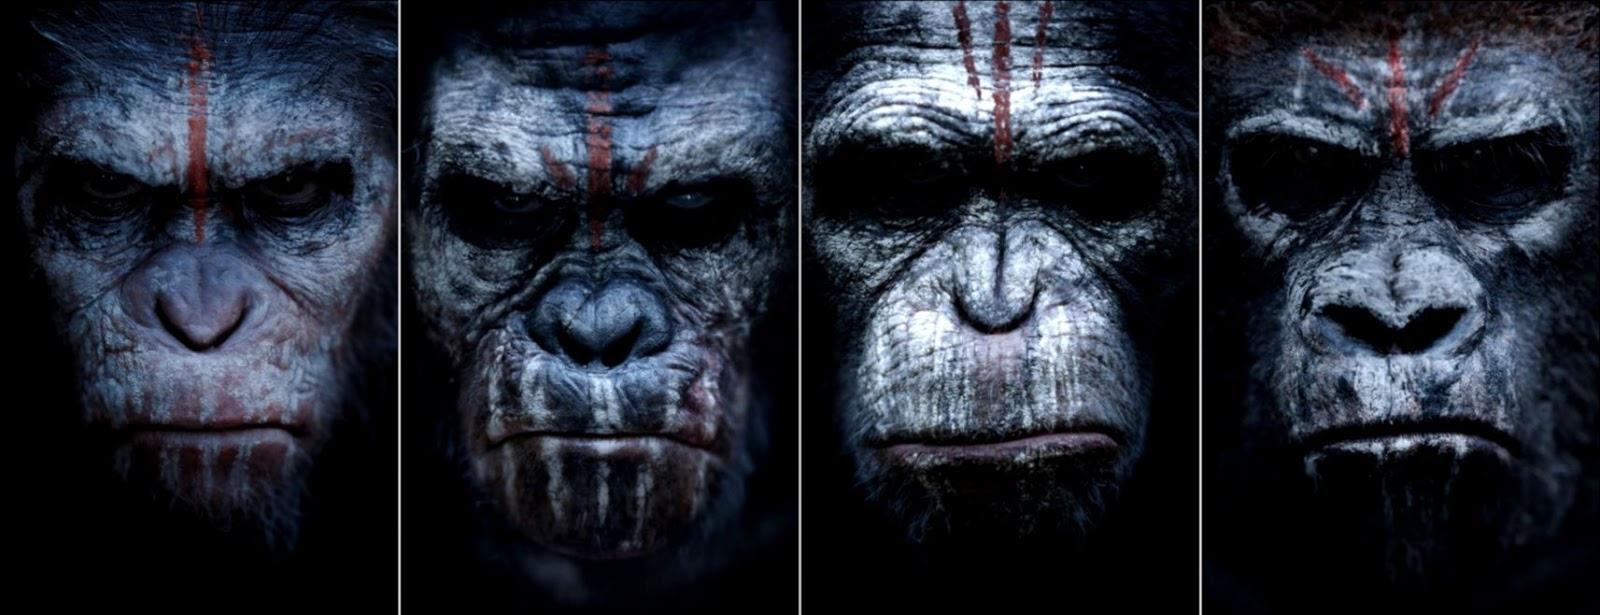 Dawn Of The Planet Of The Apes Wallpaper